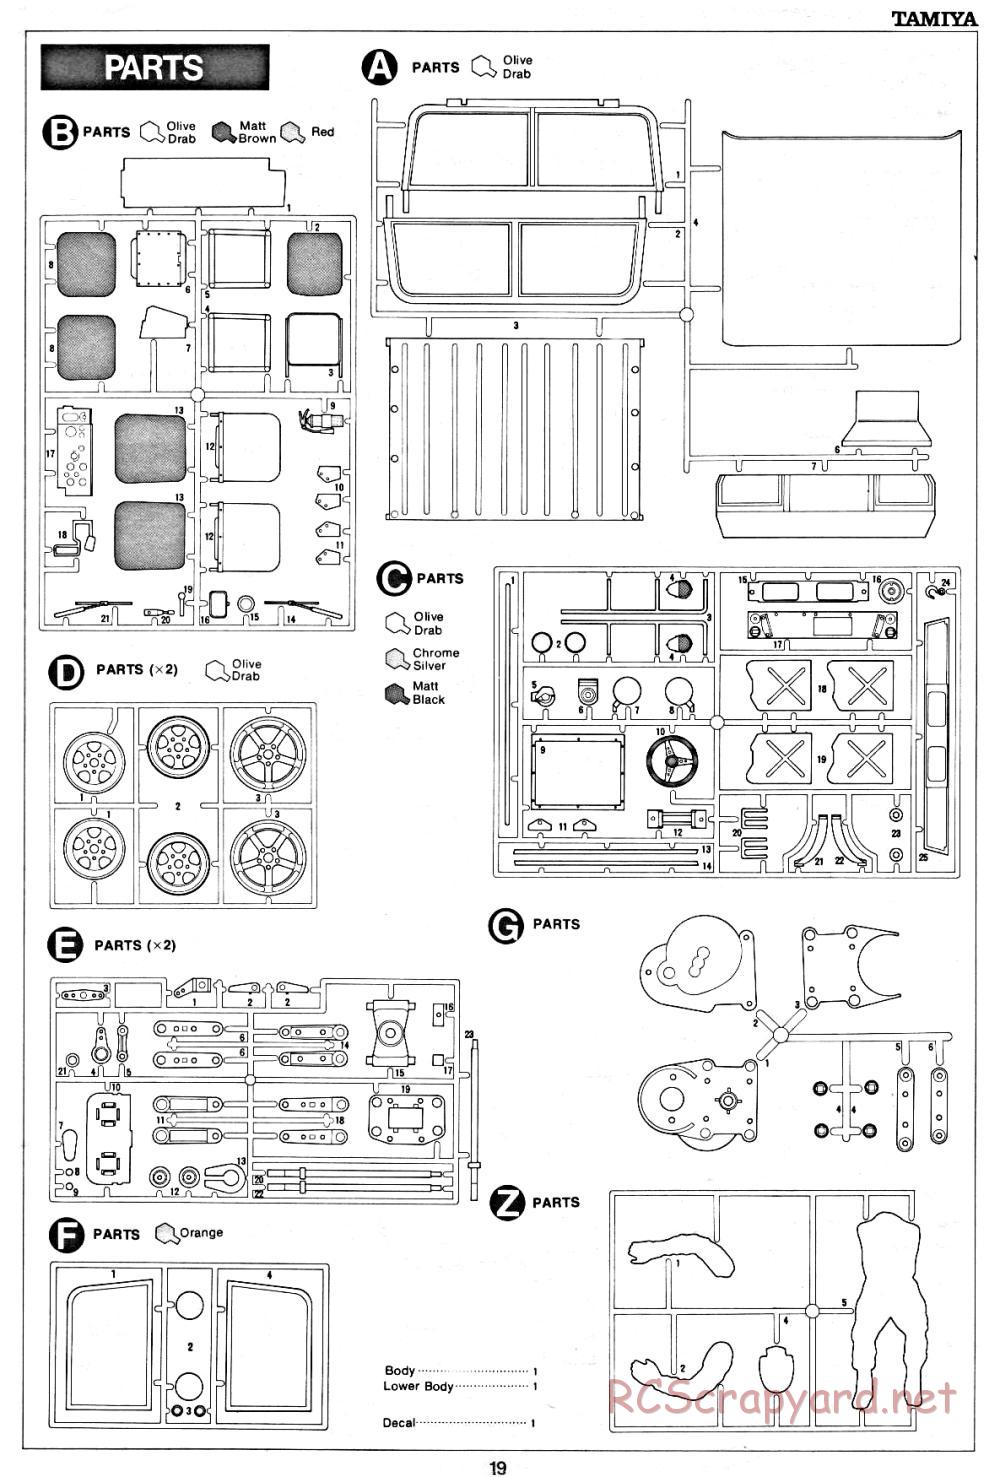 Tamiya - XR311 Combat Support Vehicle (1977) Chassis - Manual - Page 19